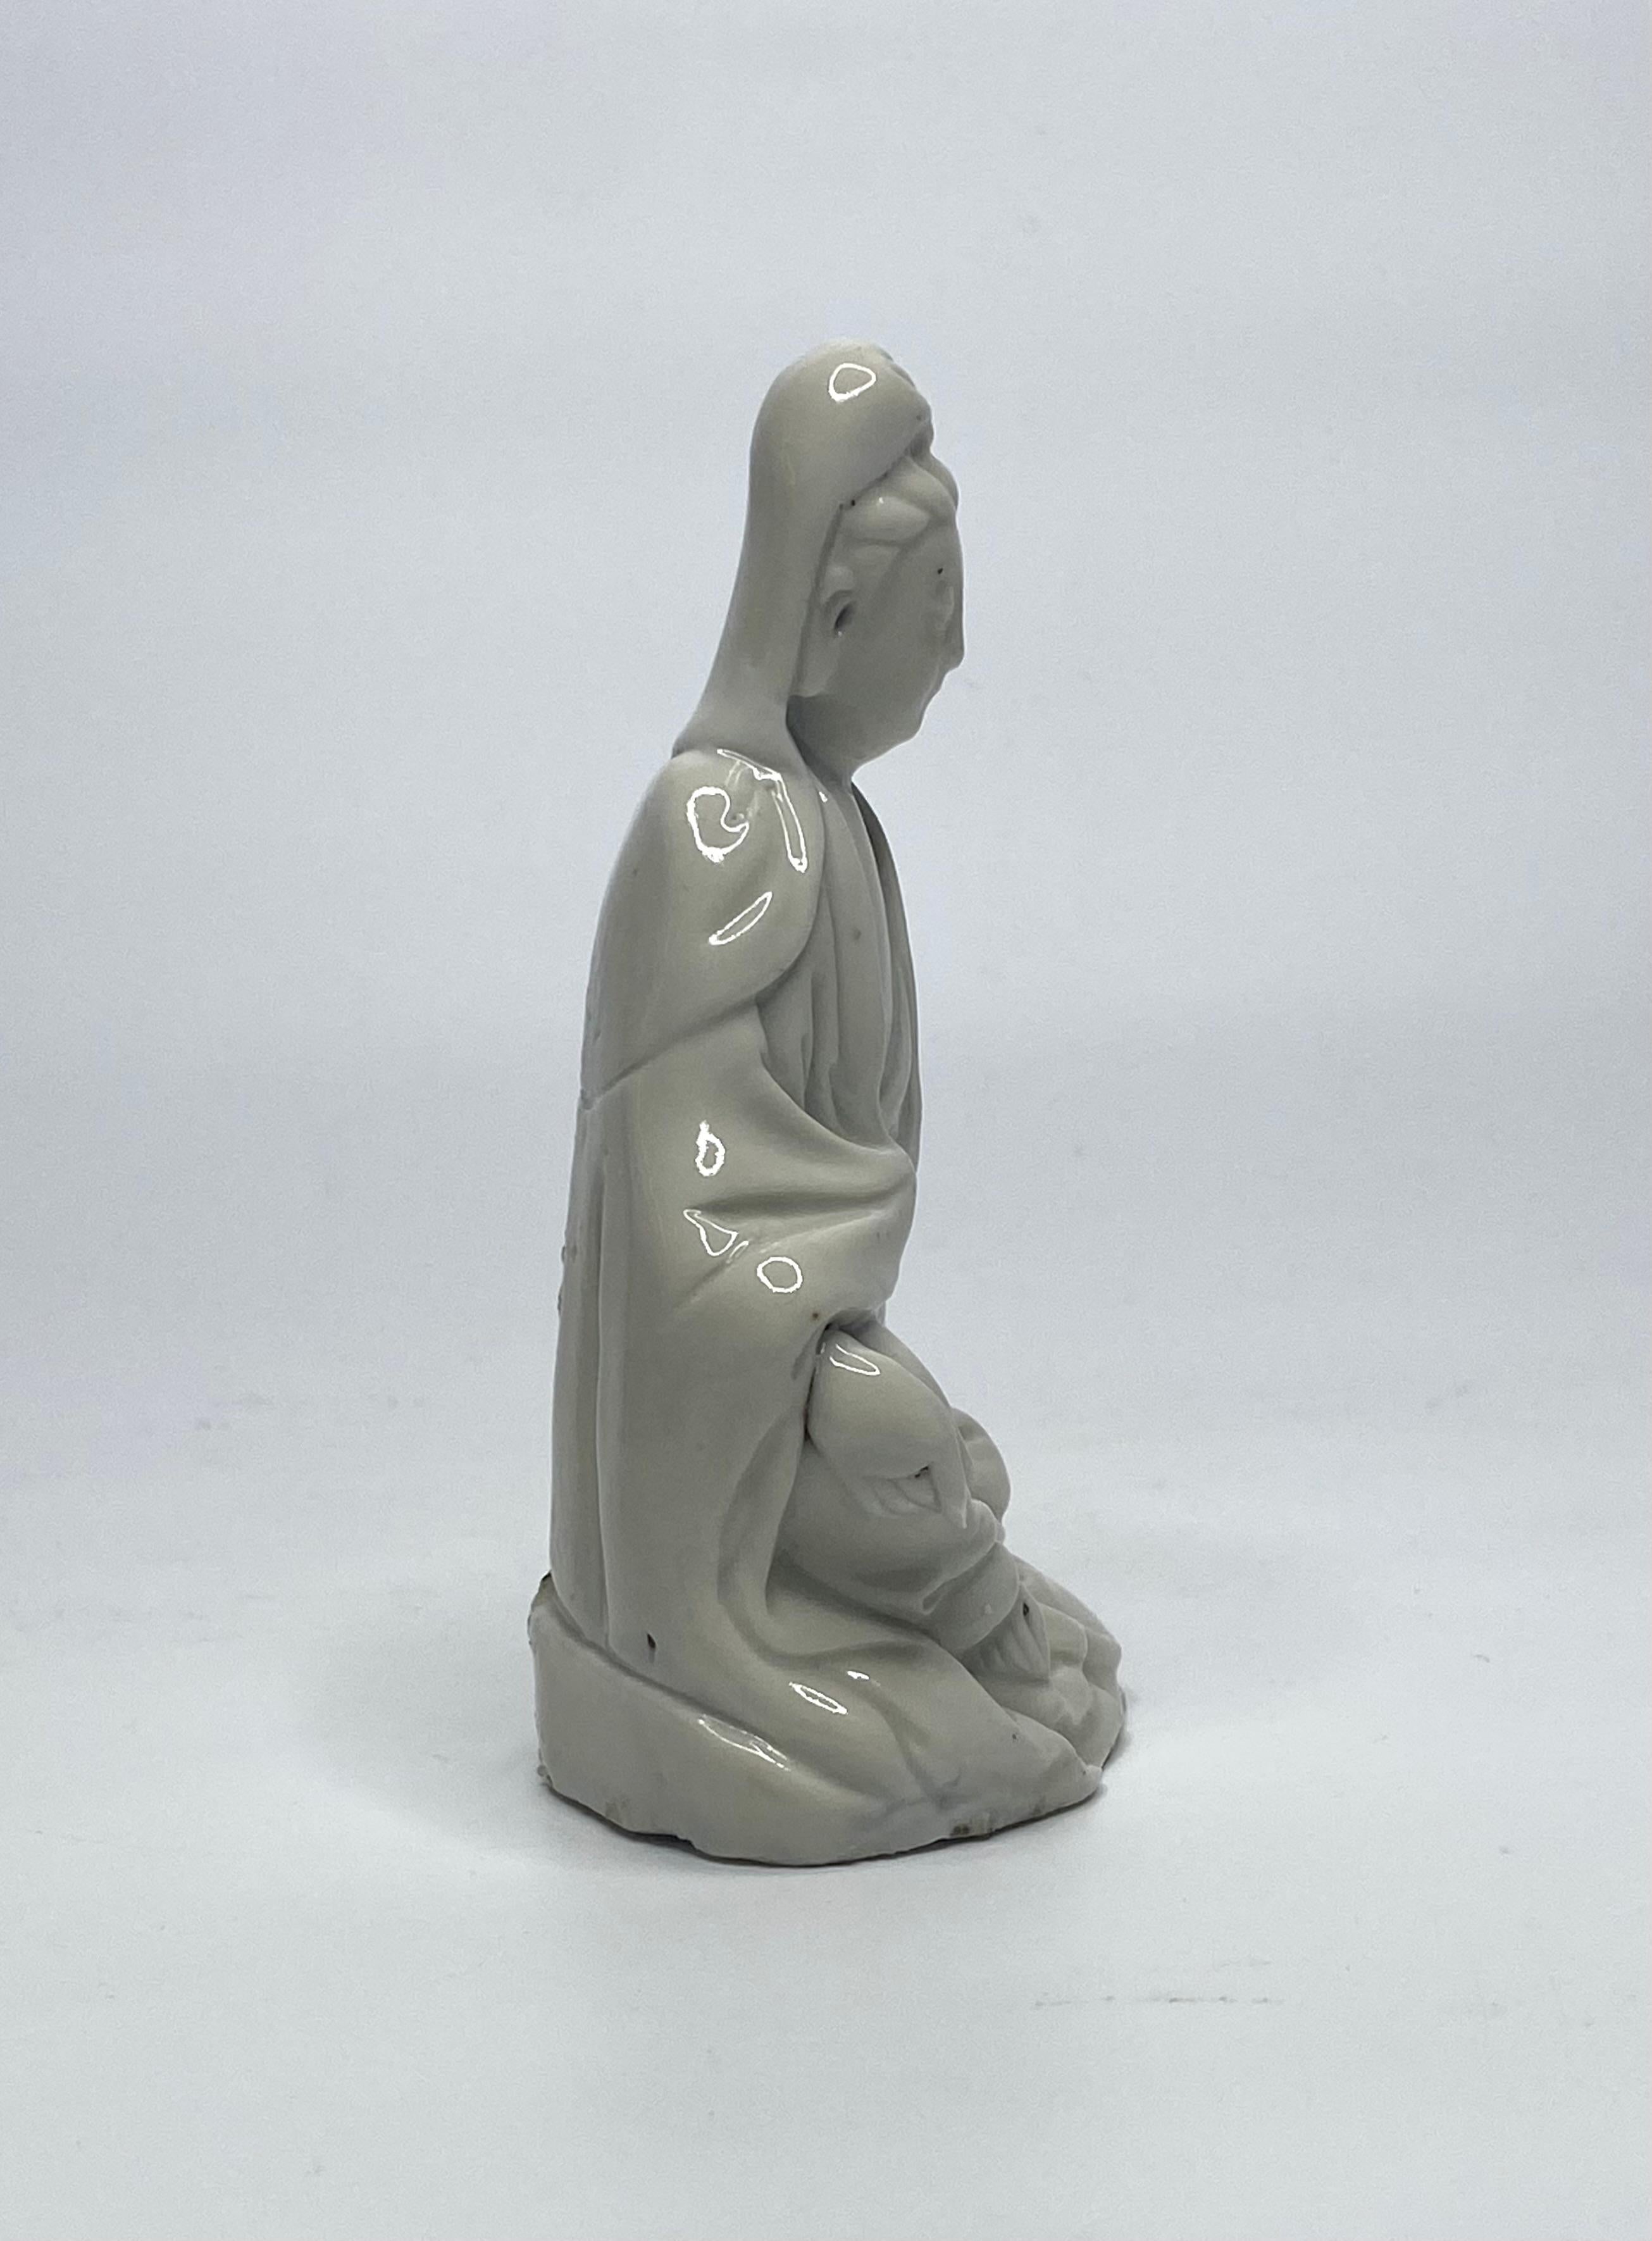 Chinese blanc de chine figure of Guanyin, Dehua, late 17th Century. The goddess, modelled seated, wearing flowing robes, revealing her right hand, and foot. Her head is covered by a cowl. The whole covered in a blanc de chine glaze.
Height – 12 cm,